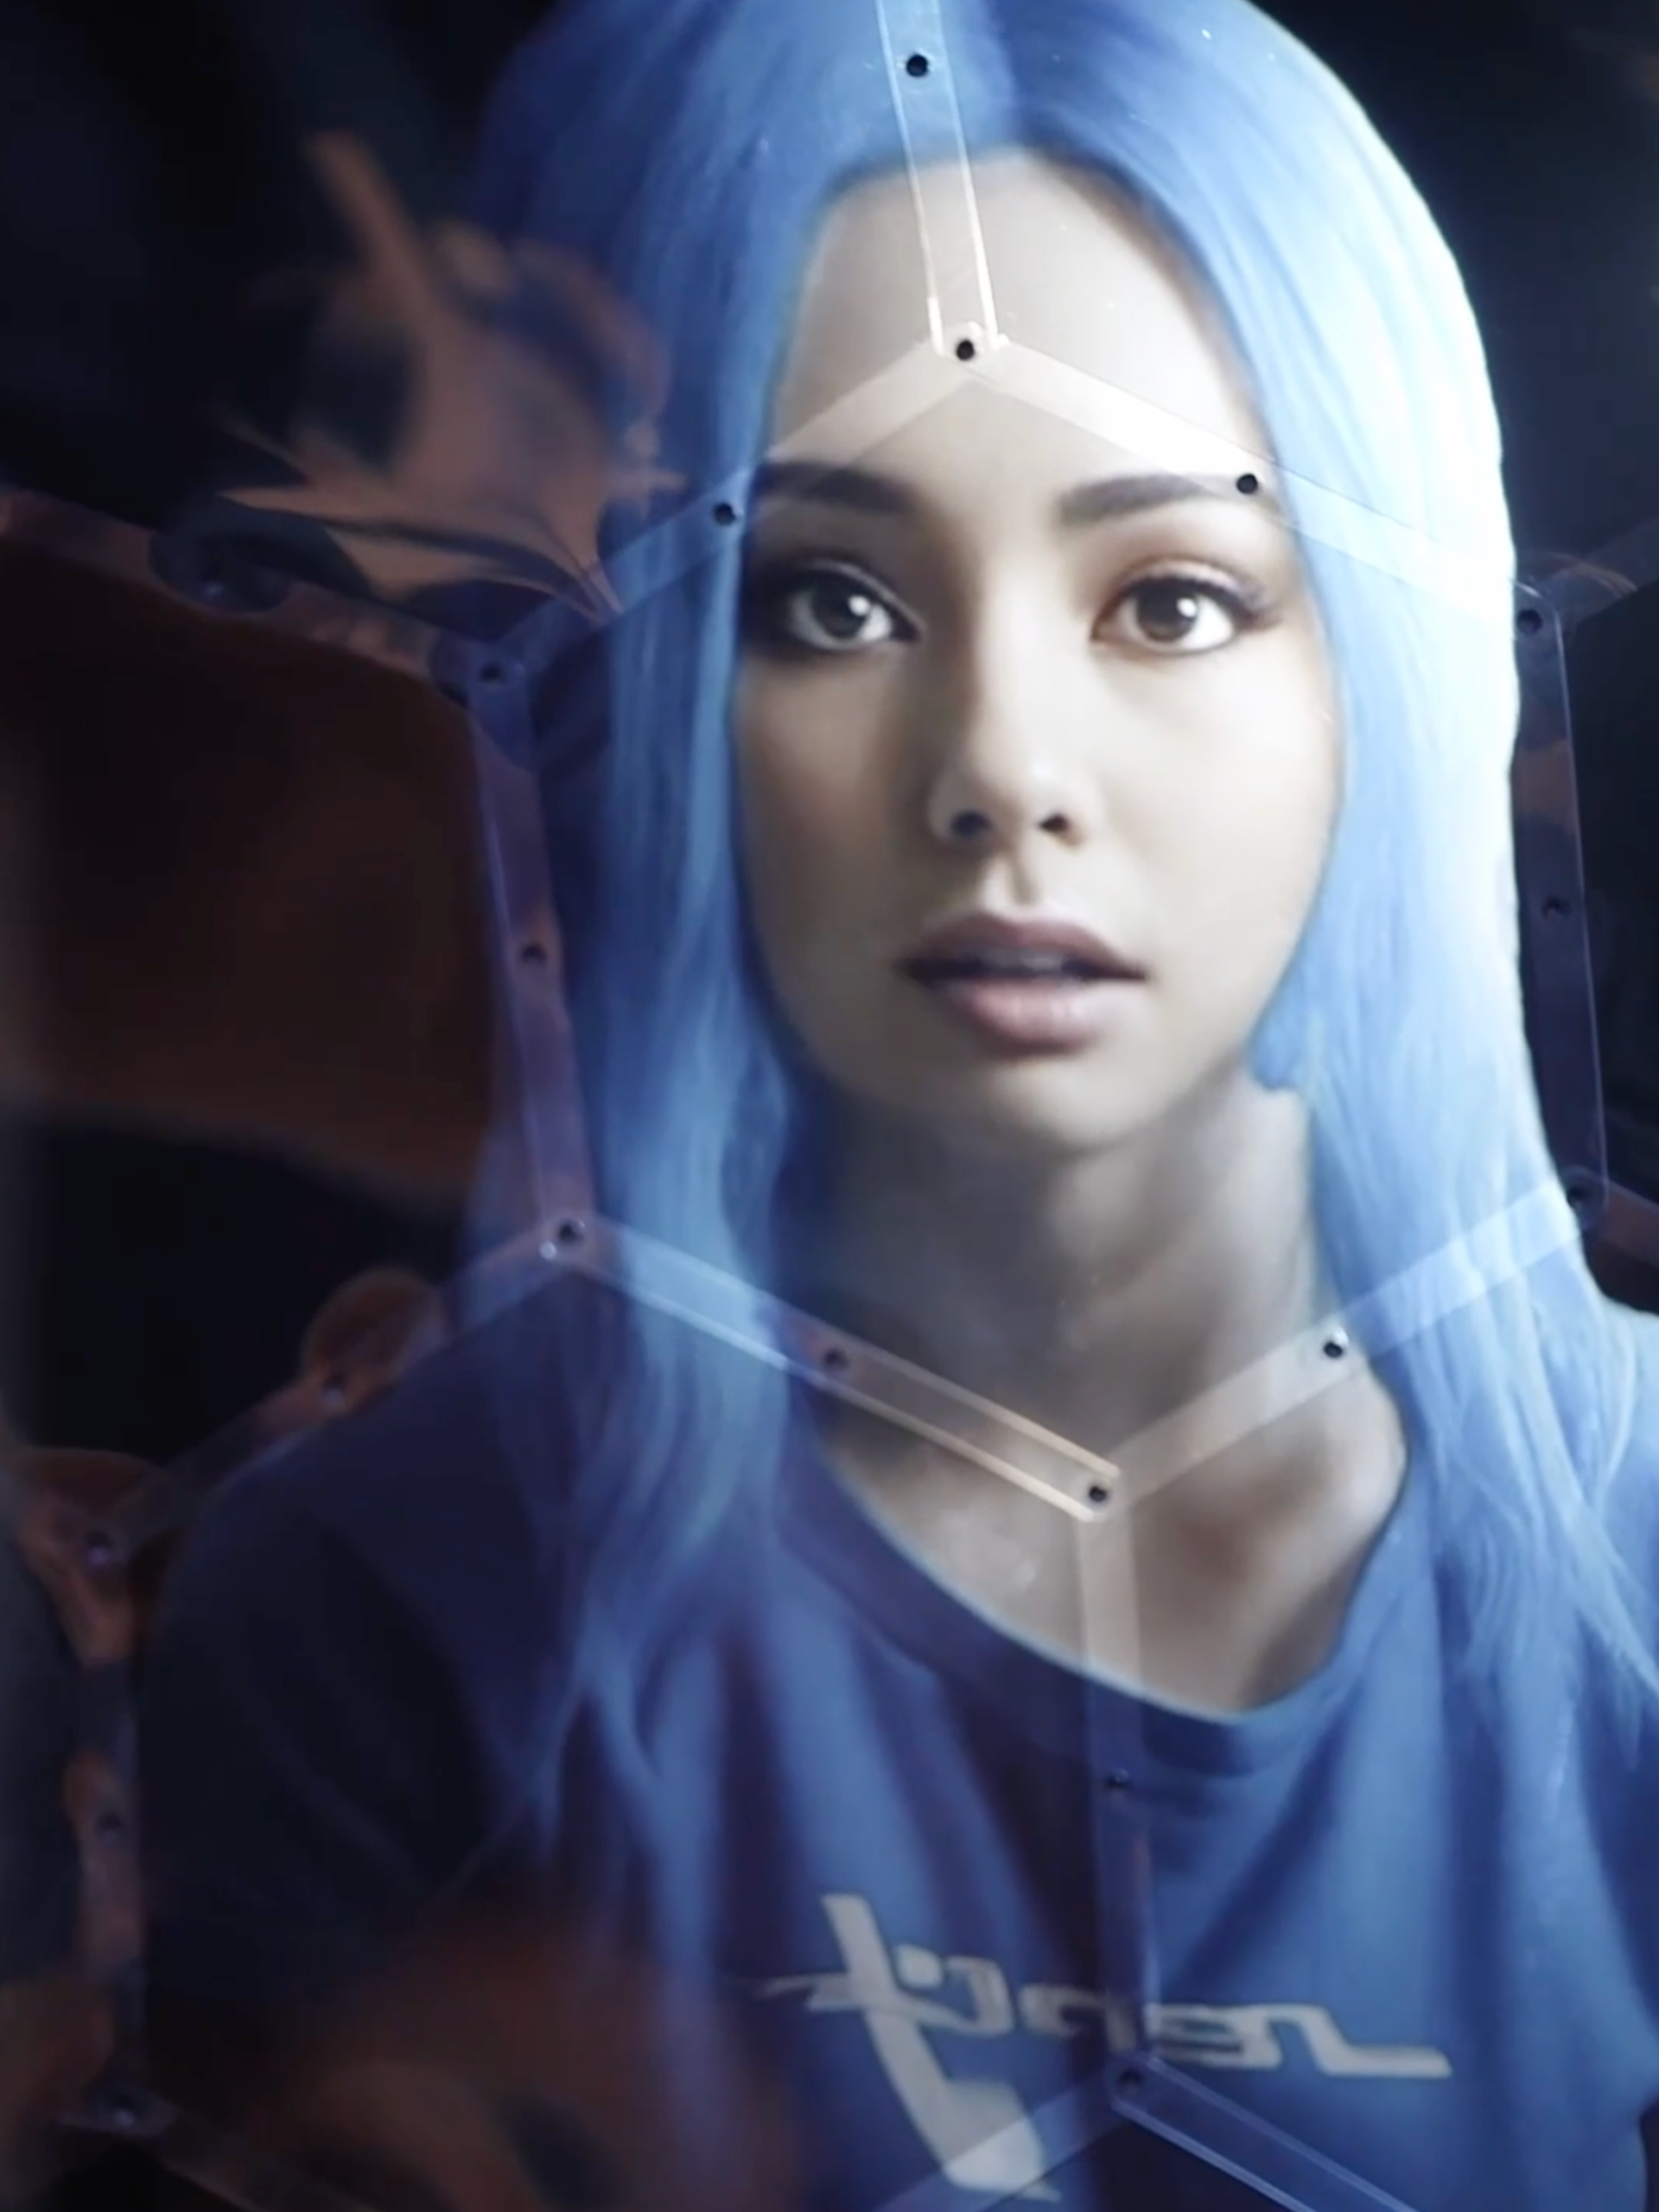 Screenshot of Jung von Matt’s Bubbleverse“ film, a walkable universe of social media filter bubbles, showing an AI generated character with long sleek blue-white hair and a blue t-shirt